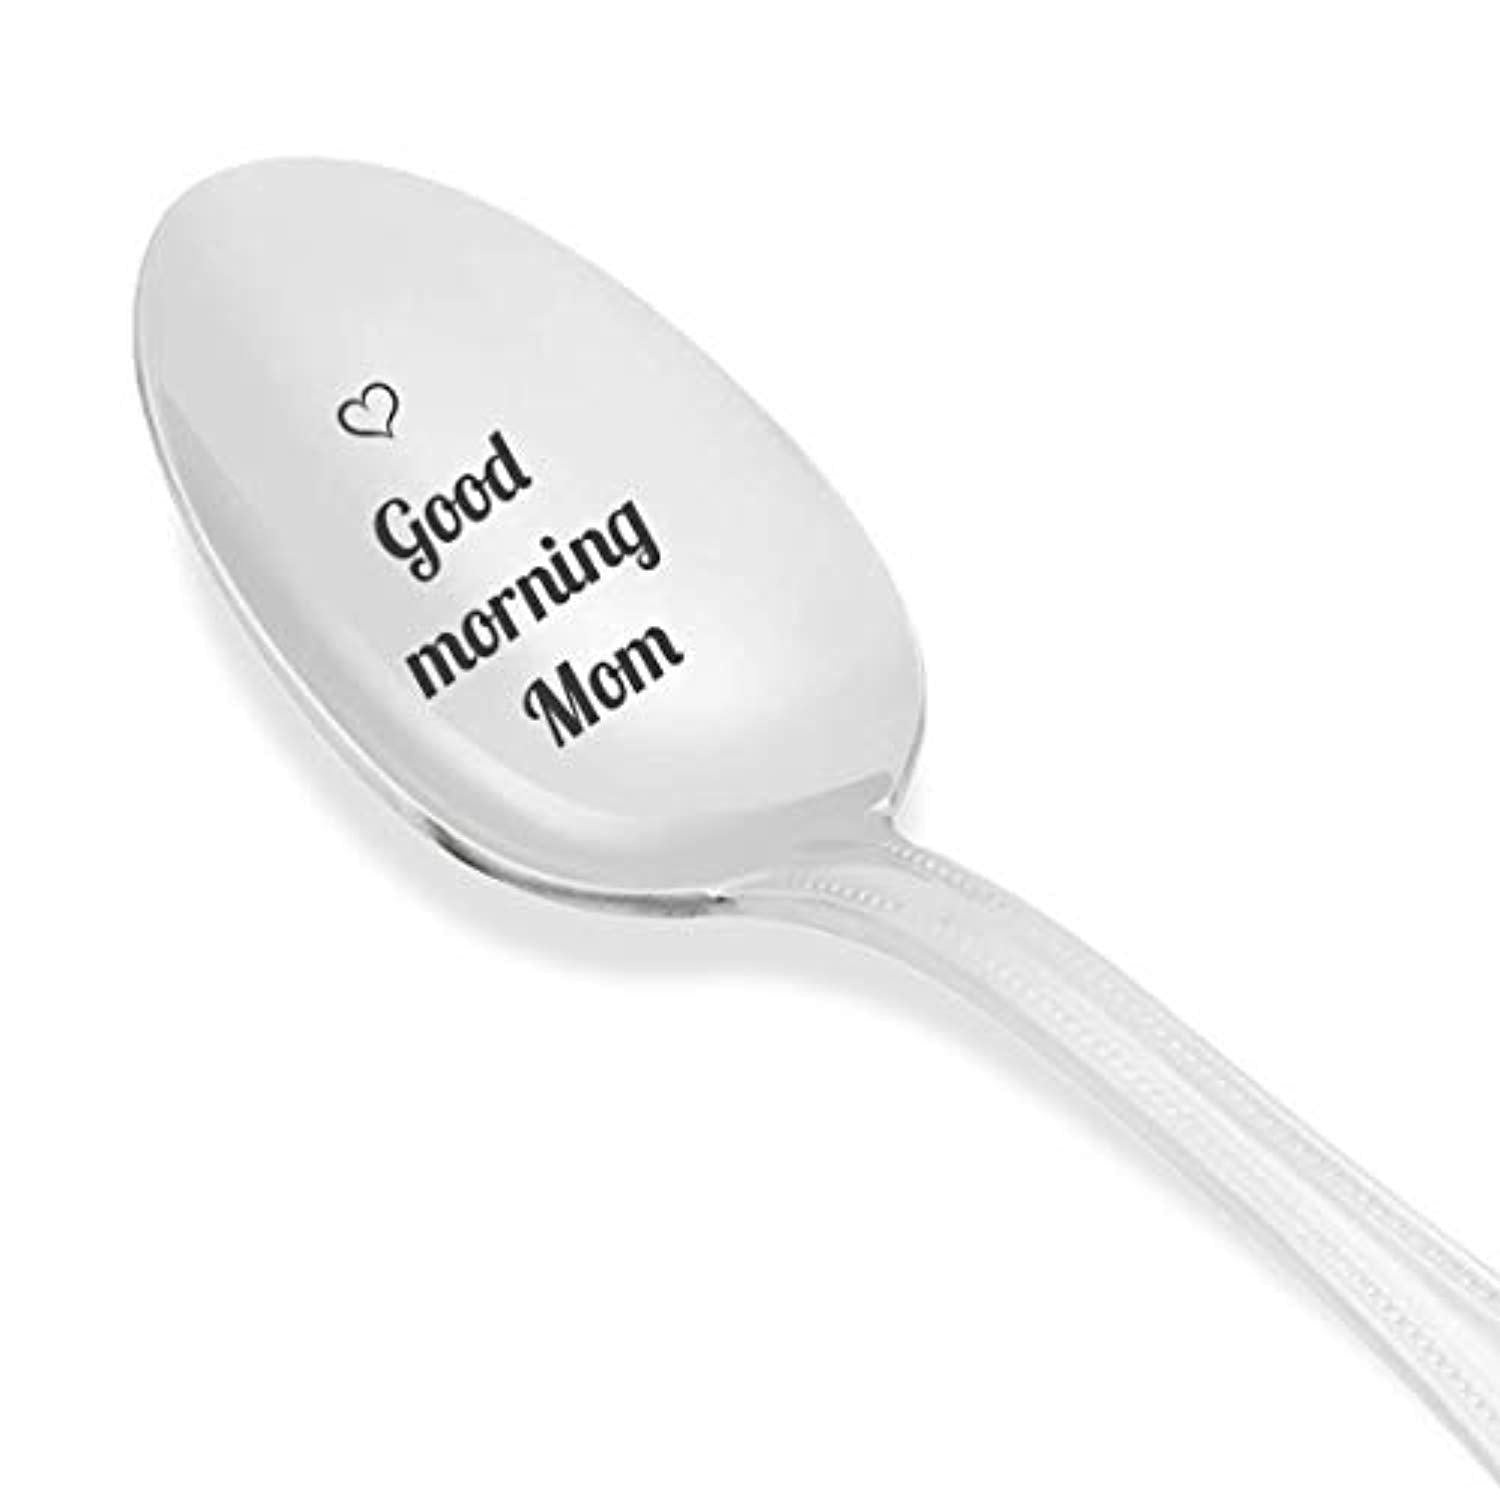 Best Mom Gifts - Good Morning Super Mom - Tea Coffee Lover Stainless Steel  Engraved Spoon Funny Mom Gift for Birthday Mother's Day Xmas